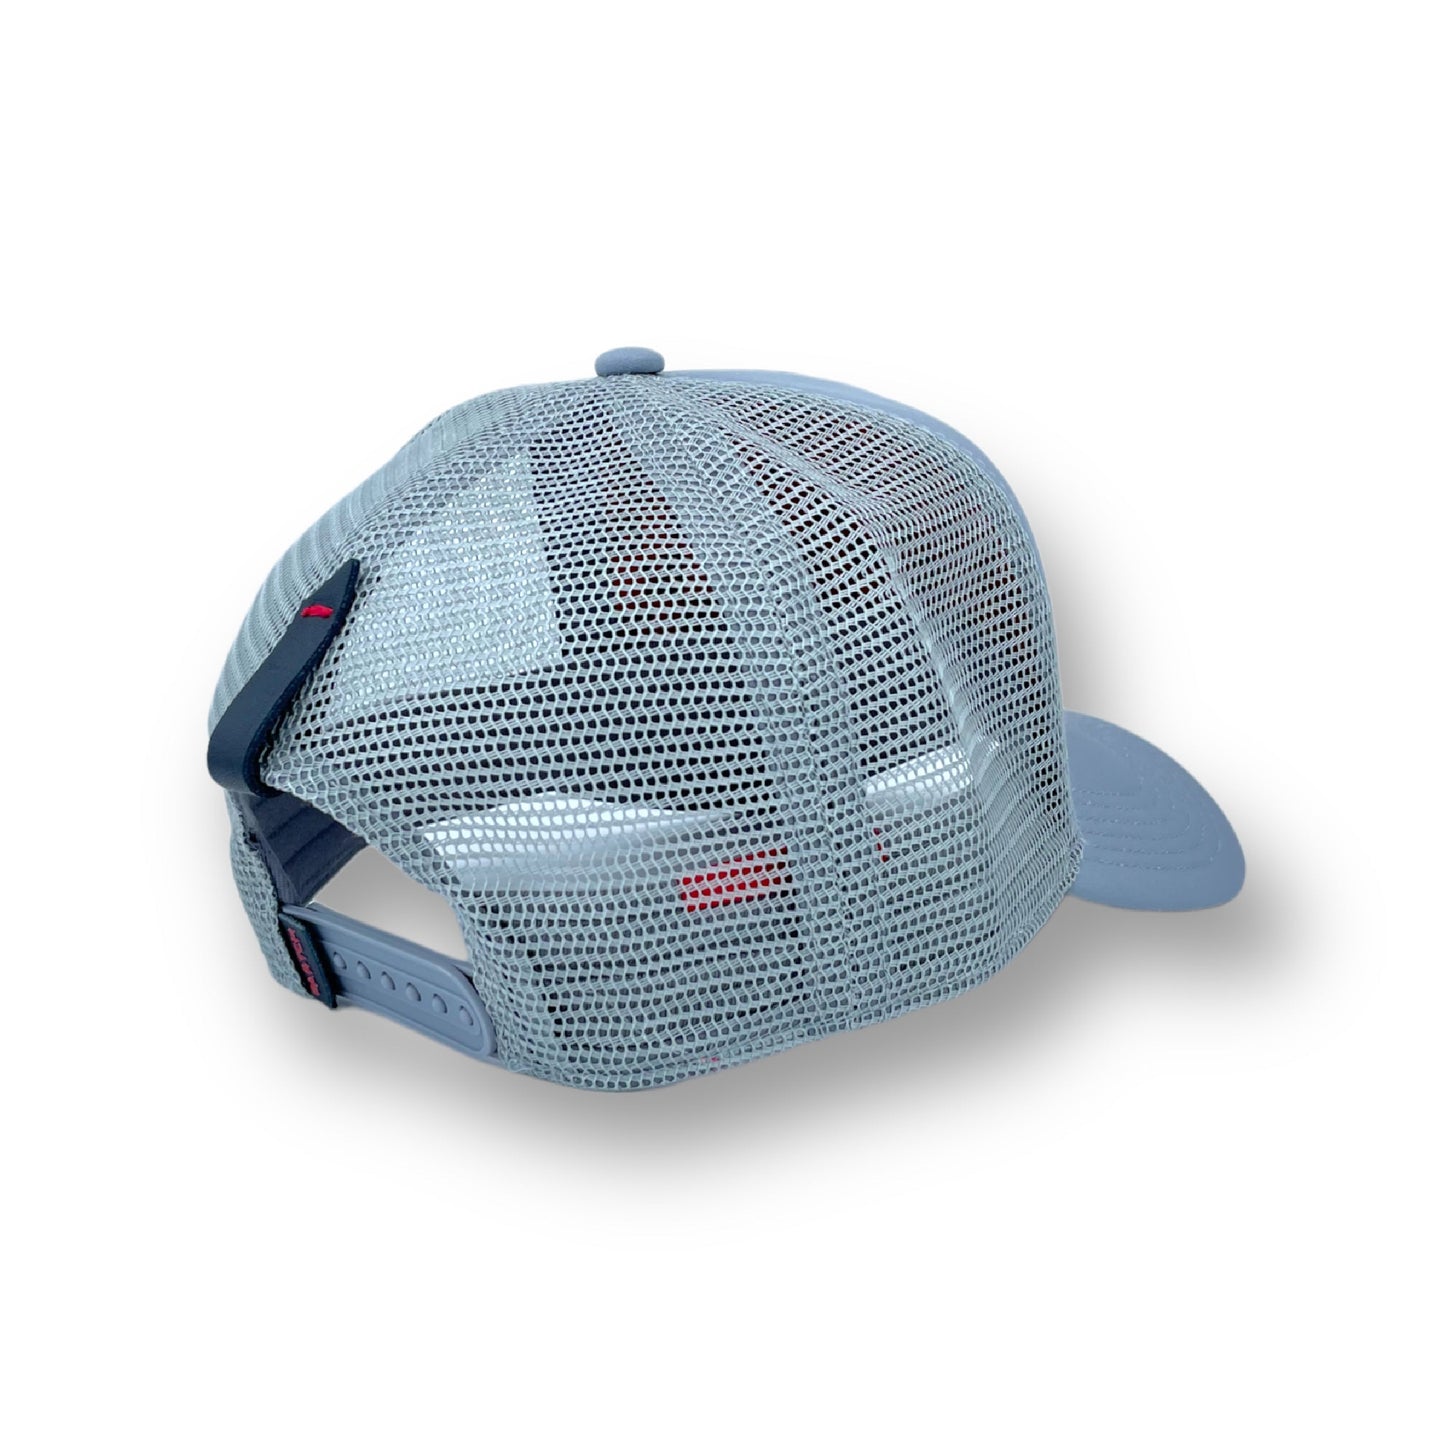 Gray Fashion Trucker Hat Mesh Breathable - Art Patches Interchangeable